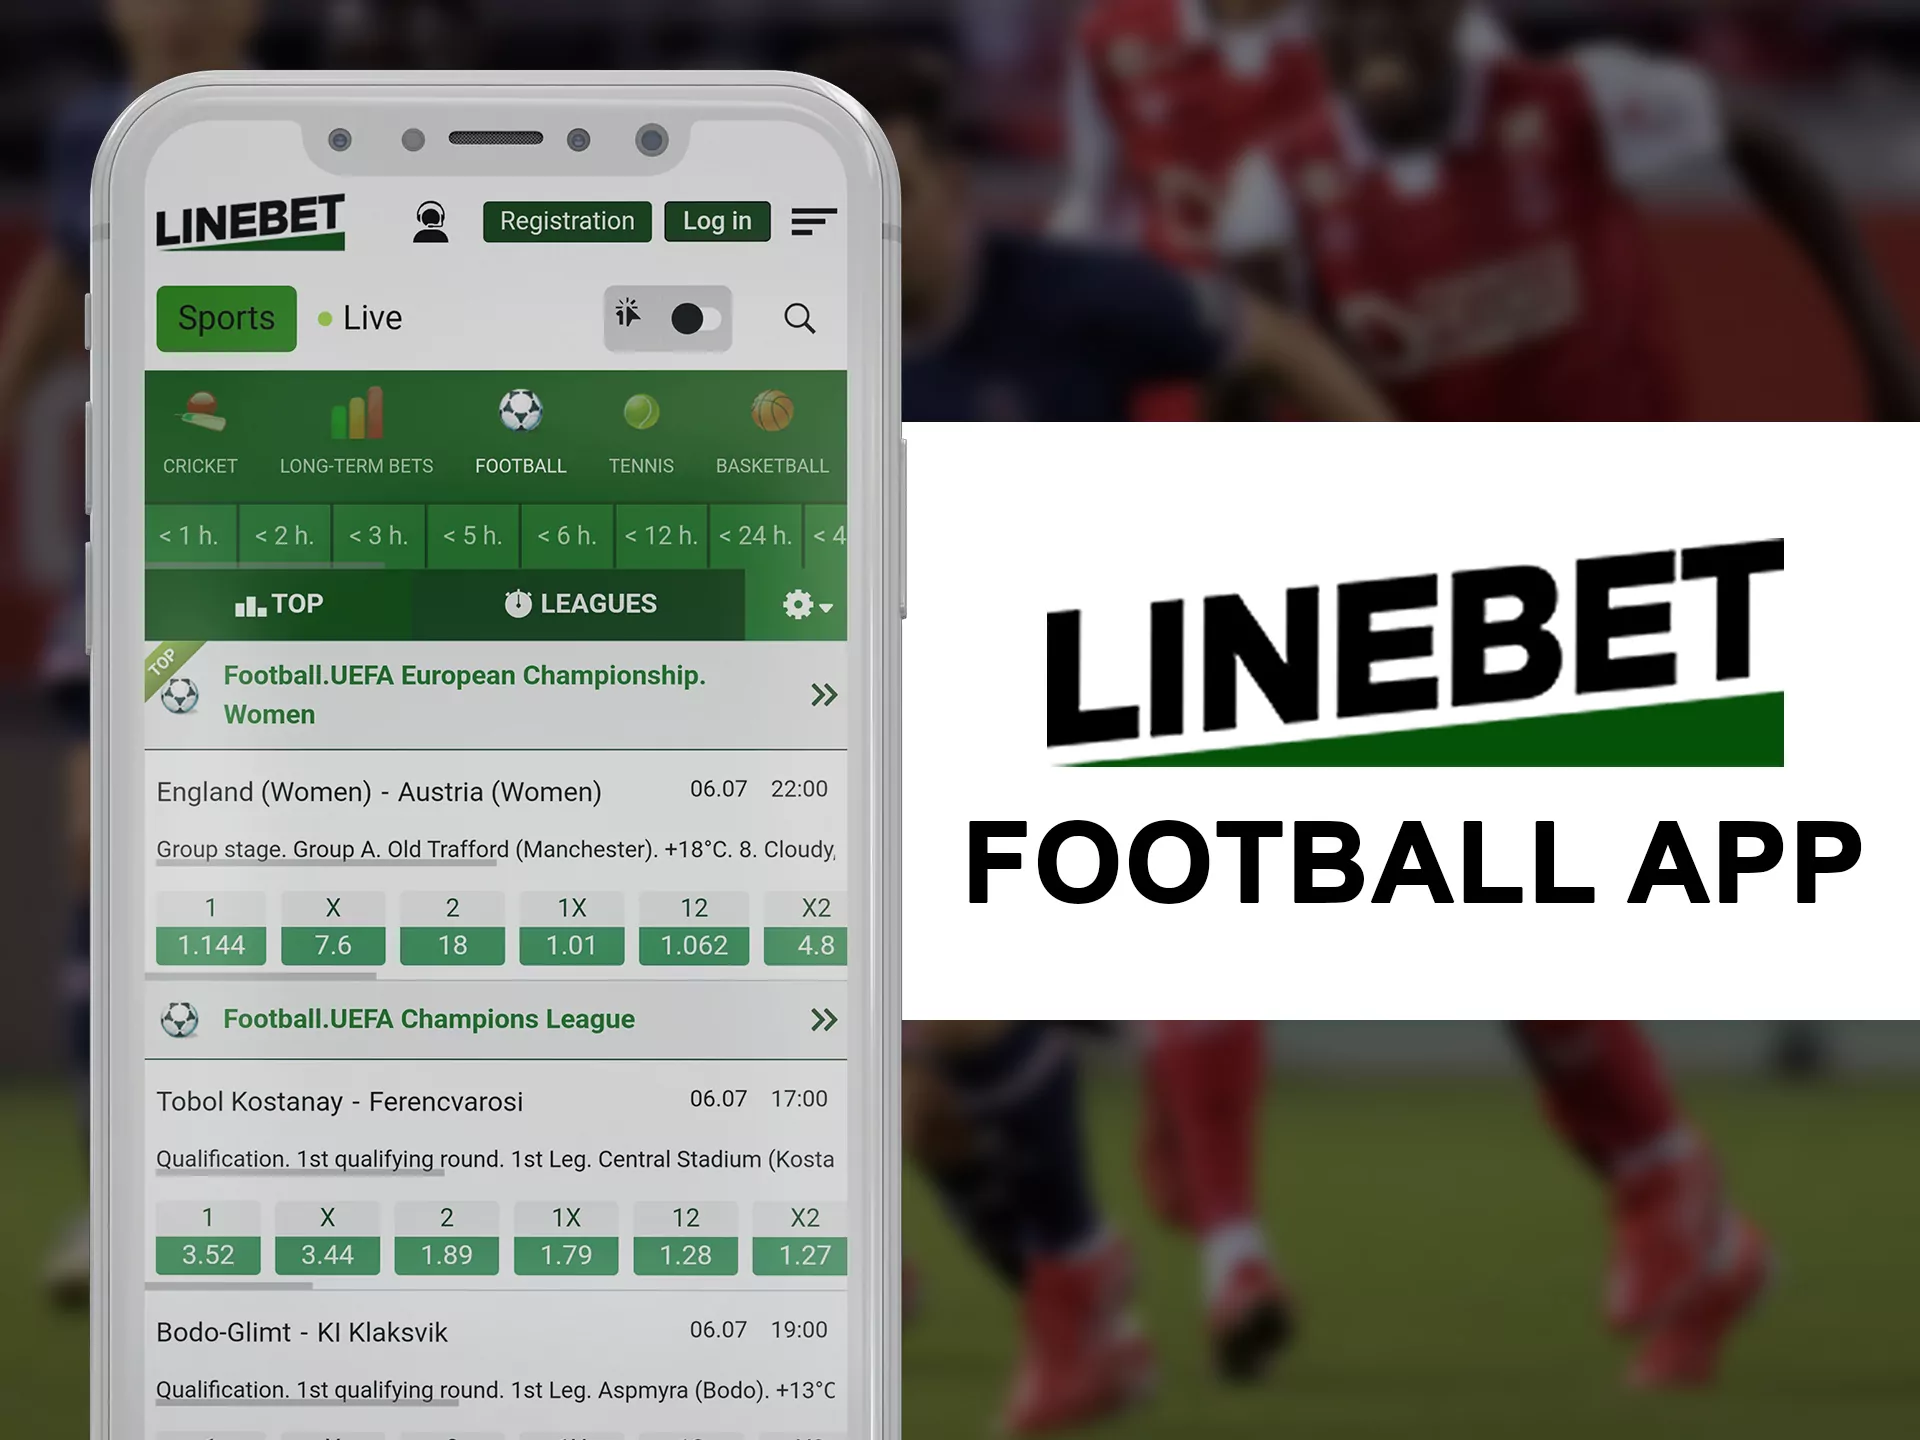 Bet on football games in live at Linebet online betting site.